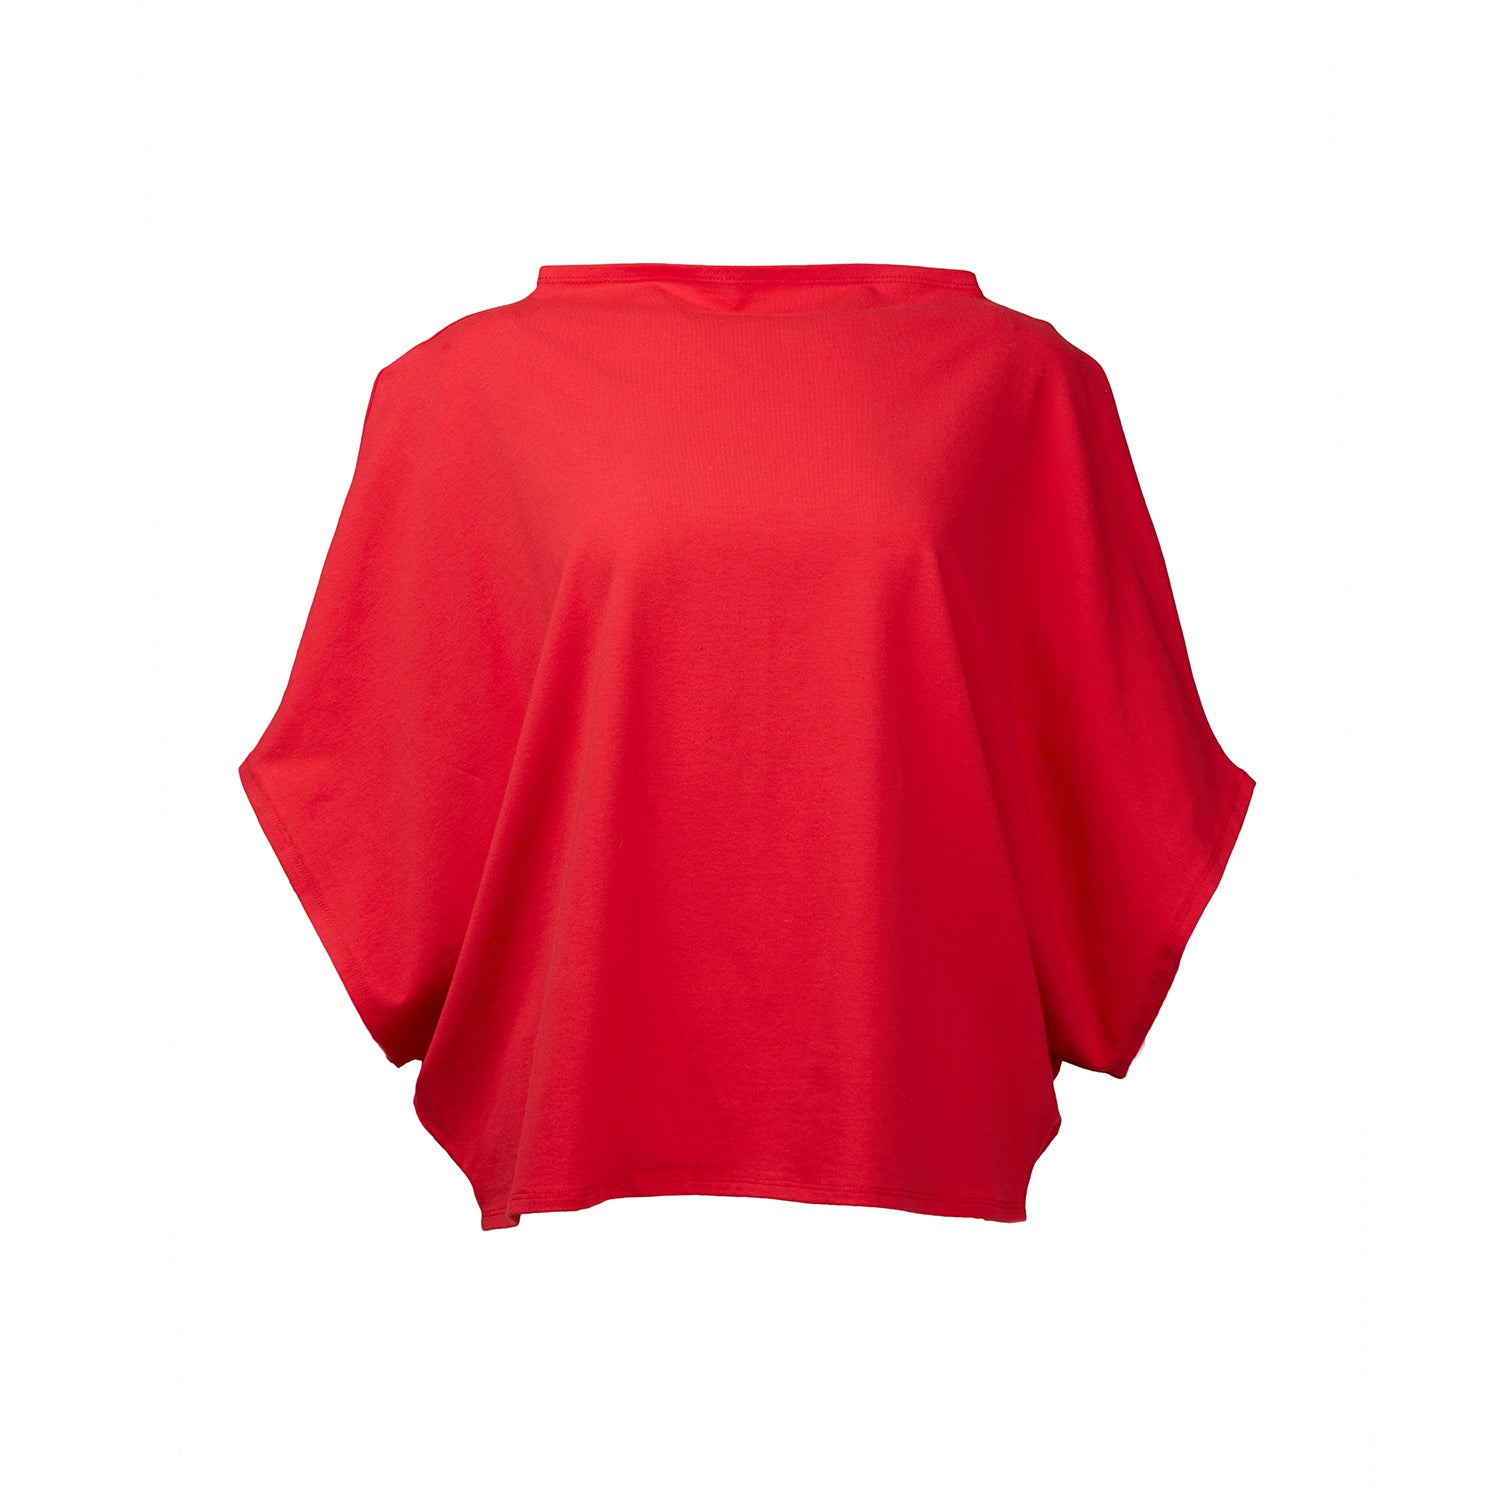 red loose fitted t-shirt in organic cotton by Malaika New York